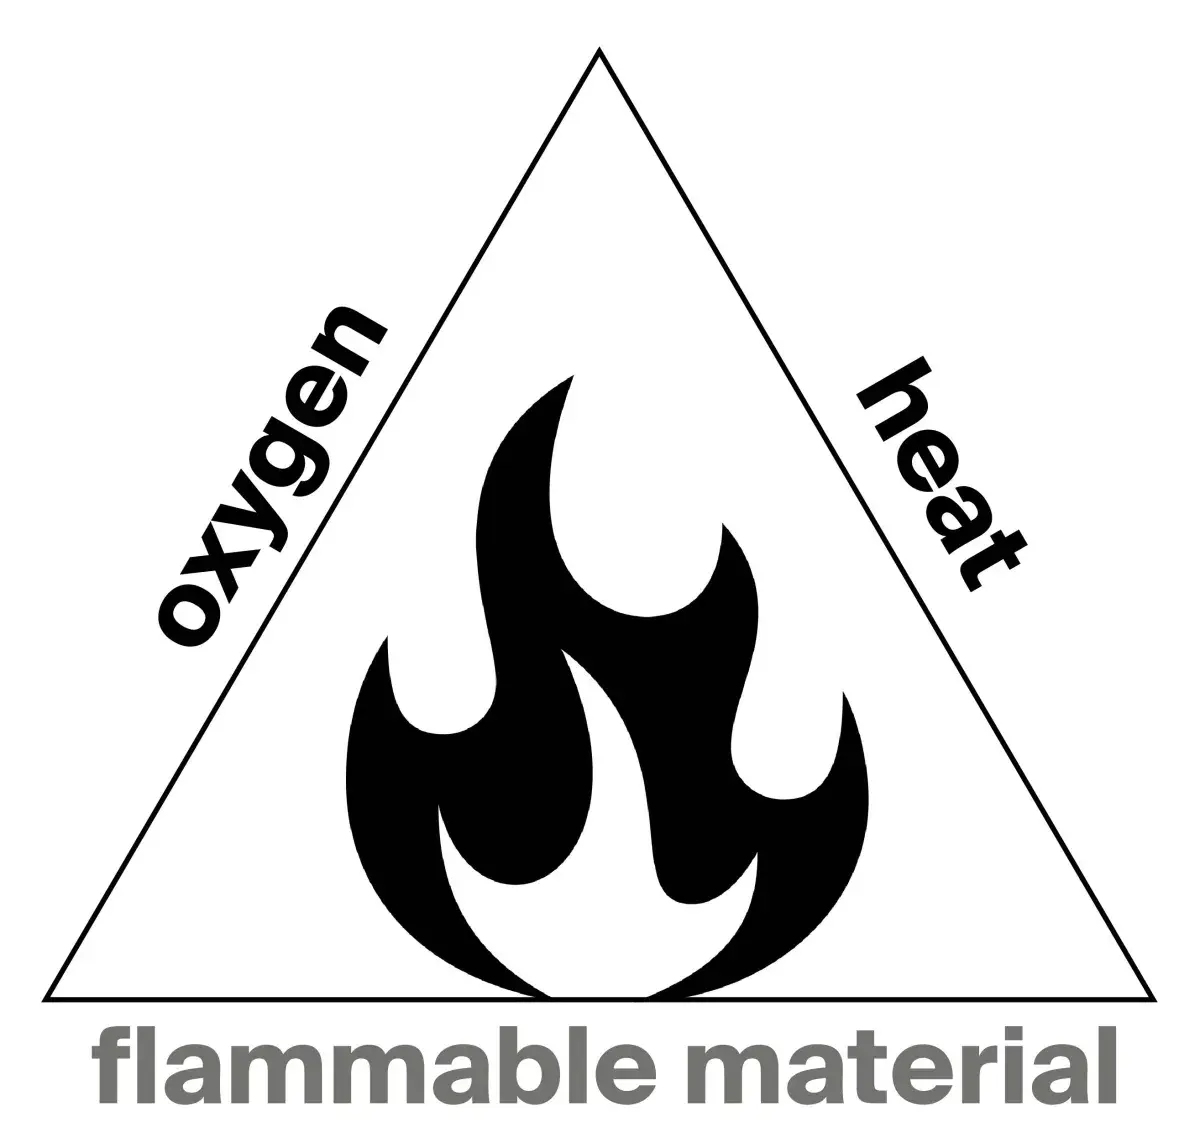 Fire triangle oxygen heat flammable material